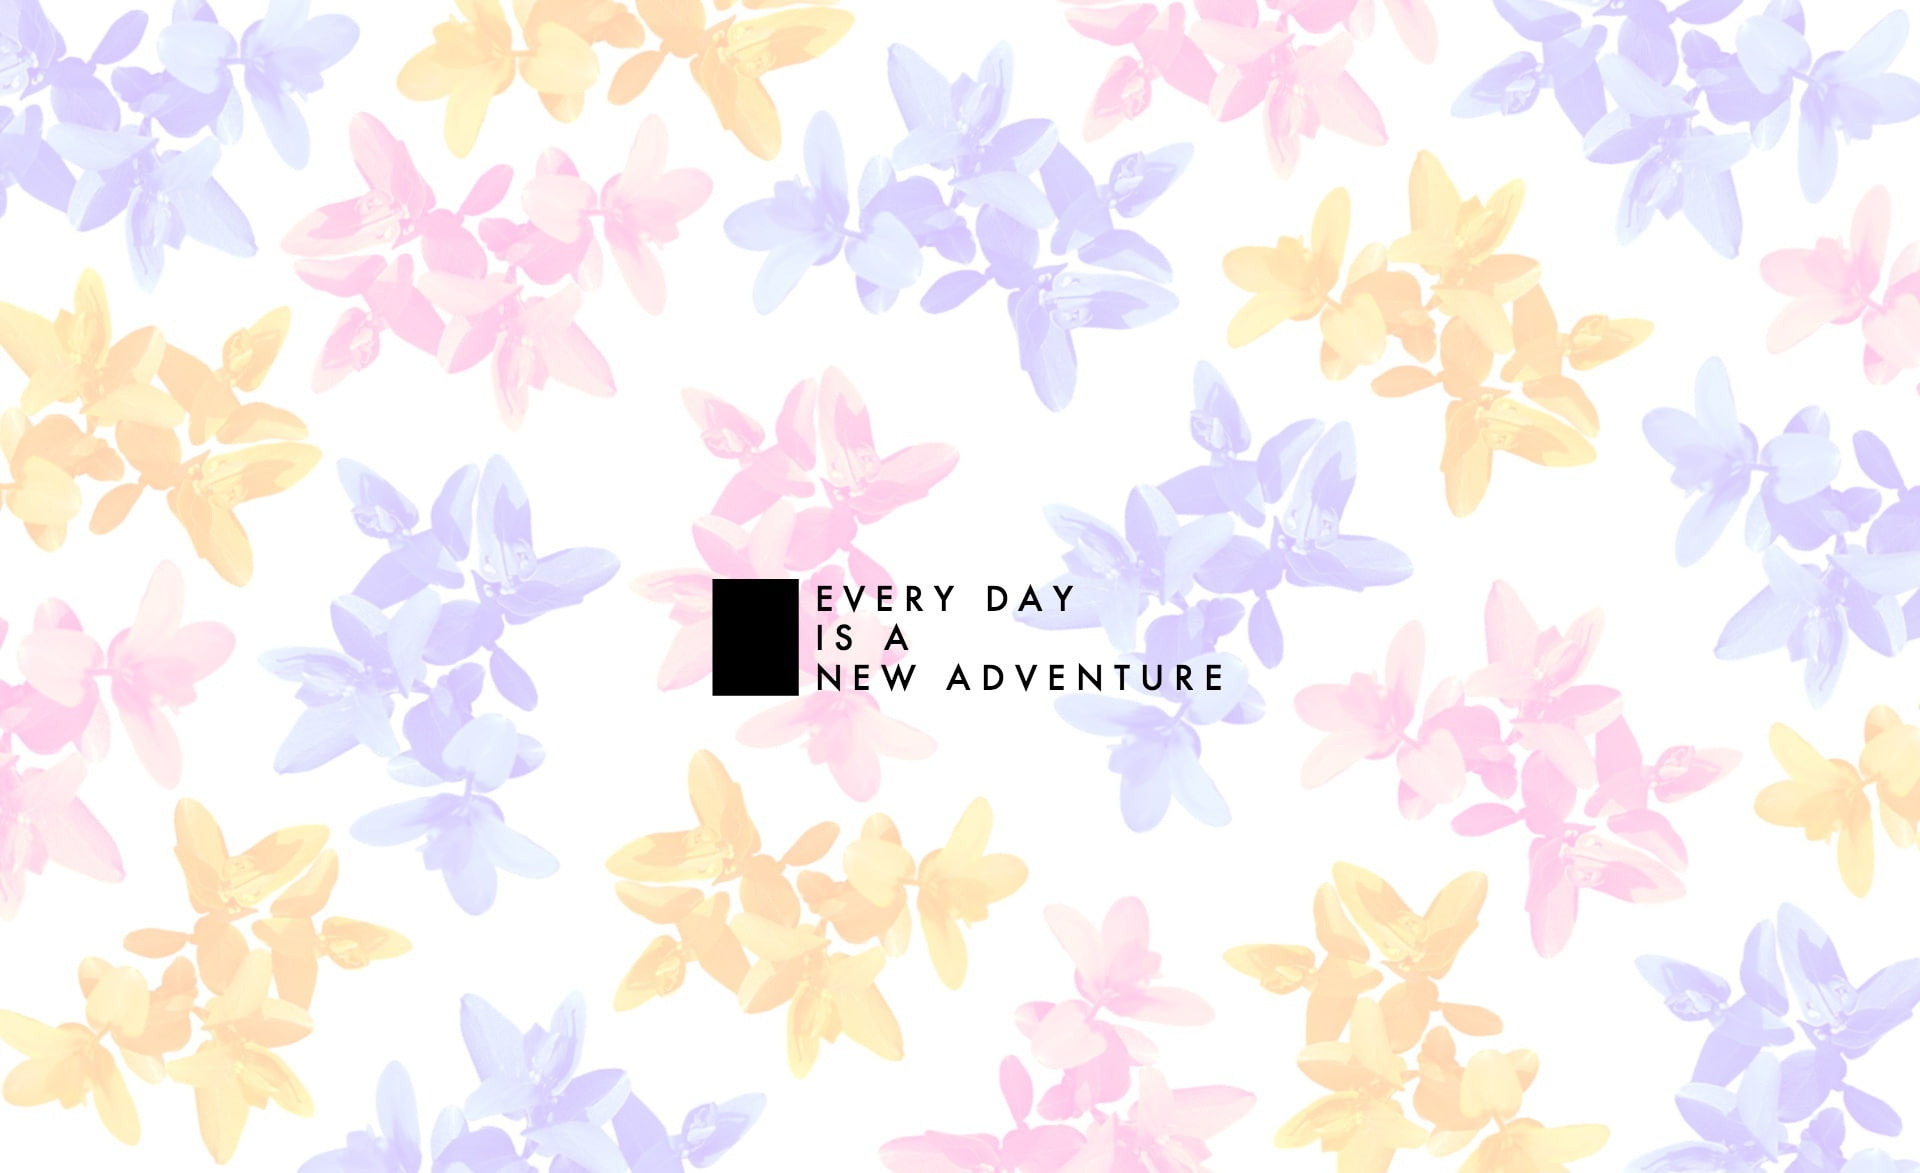 EVERY DAY IS A NEW ADVENTURE HD Wallpaper, Every Day is A new Adventure